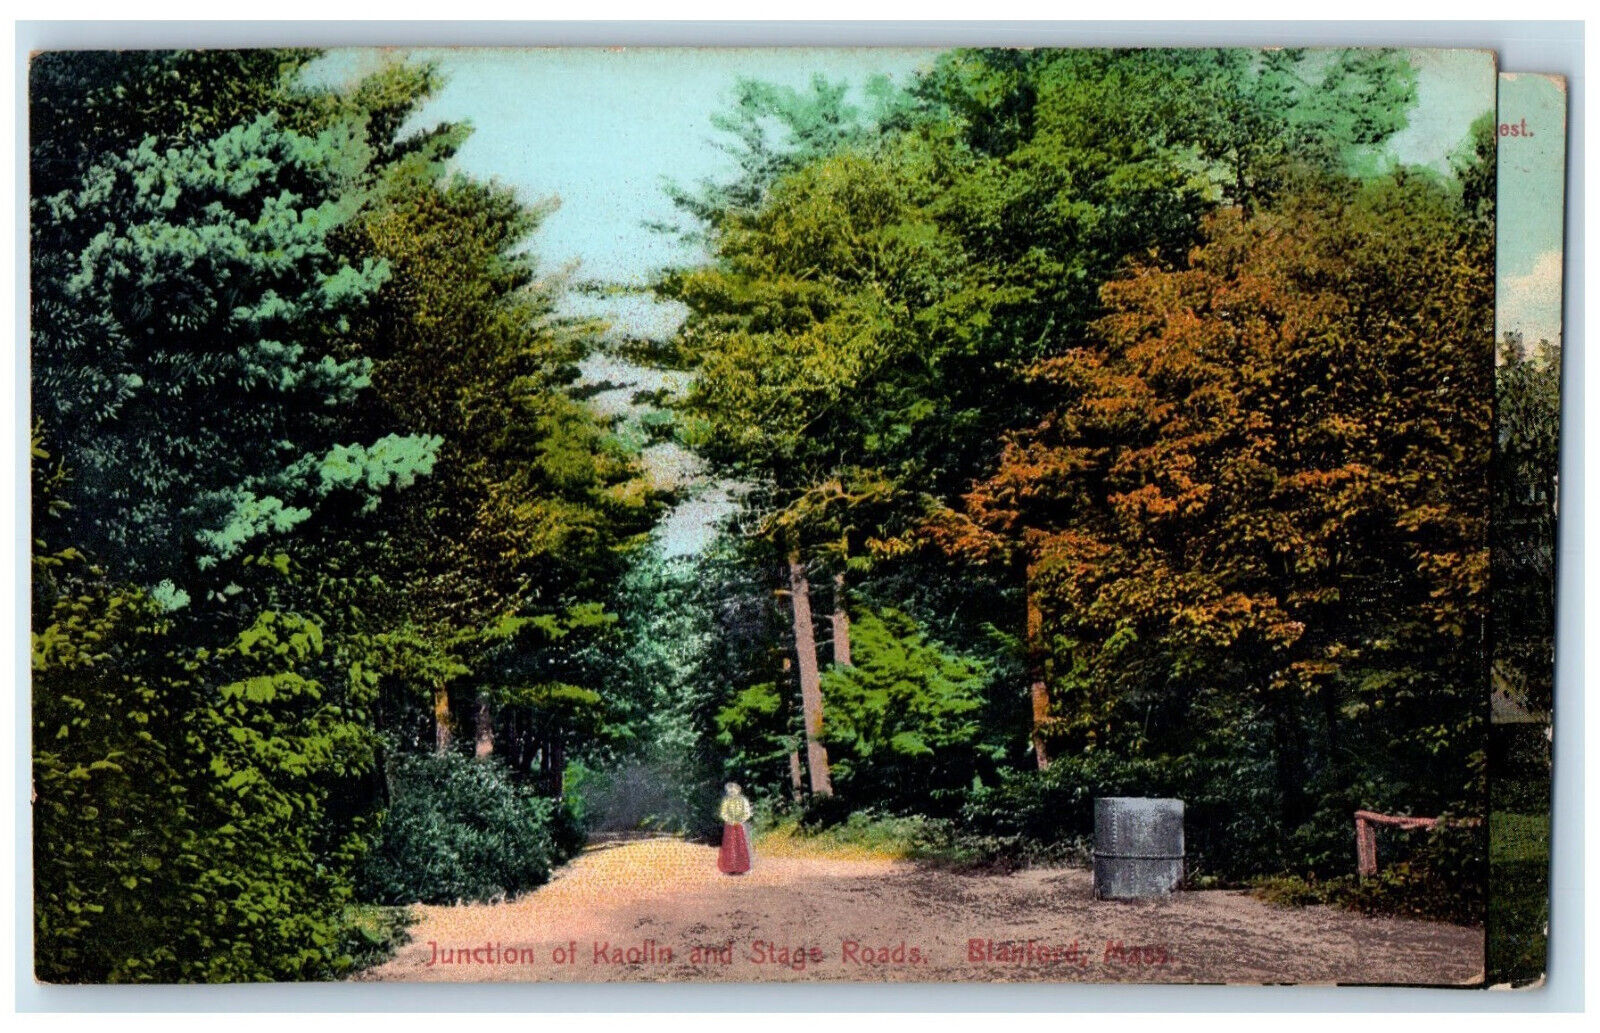 1910 Junction of Kaolin and State Roads Blanford Massachusetts MA Postcard